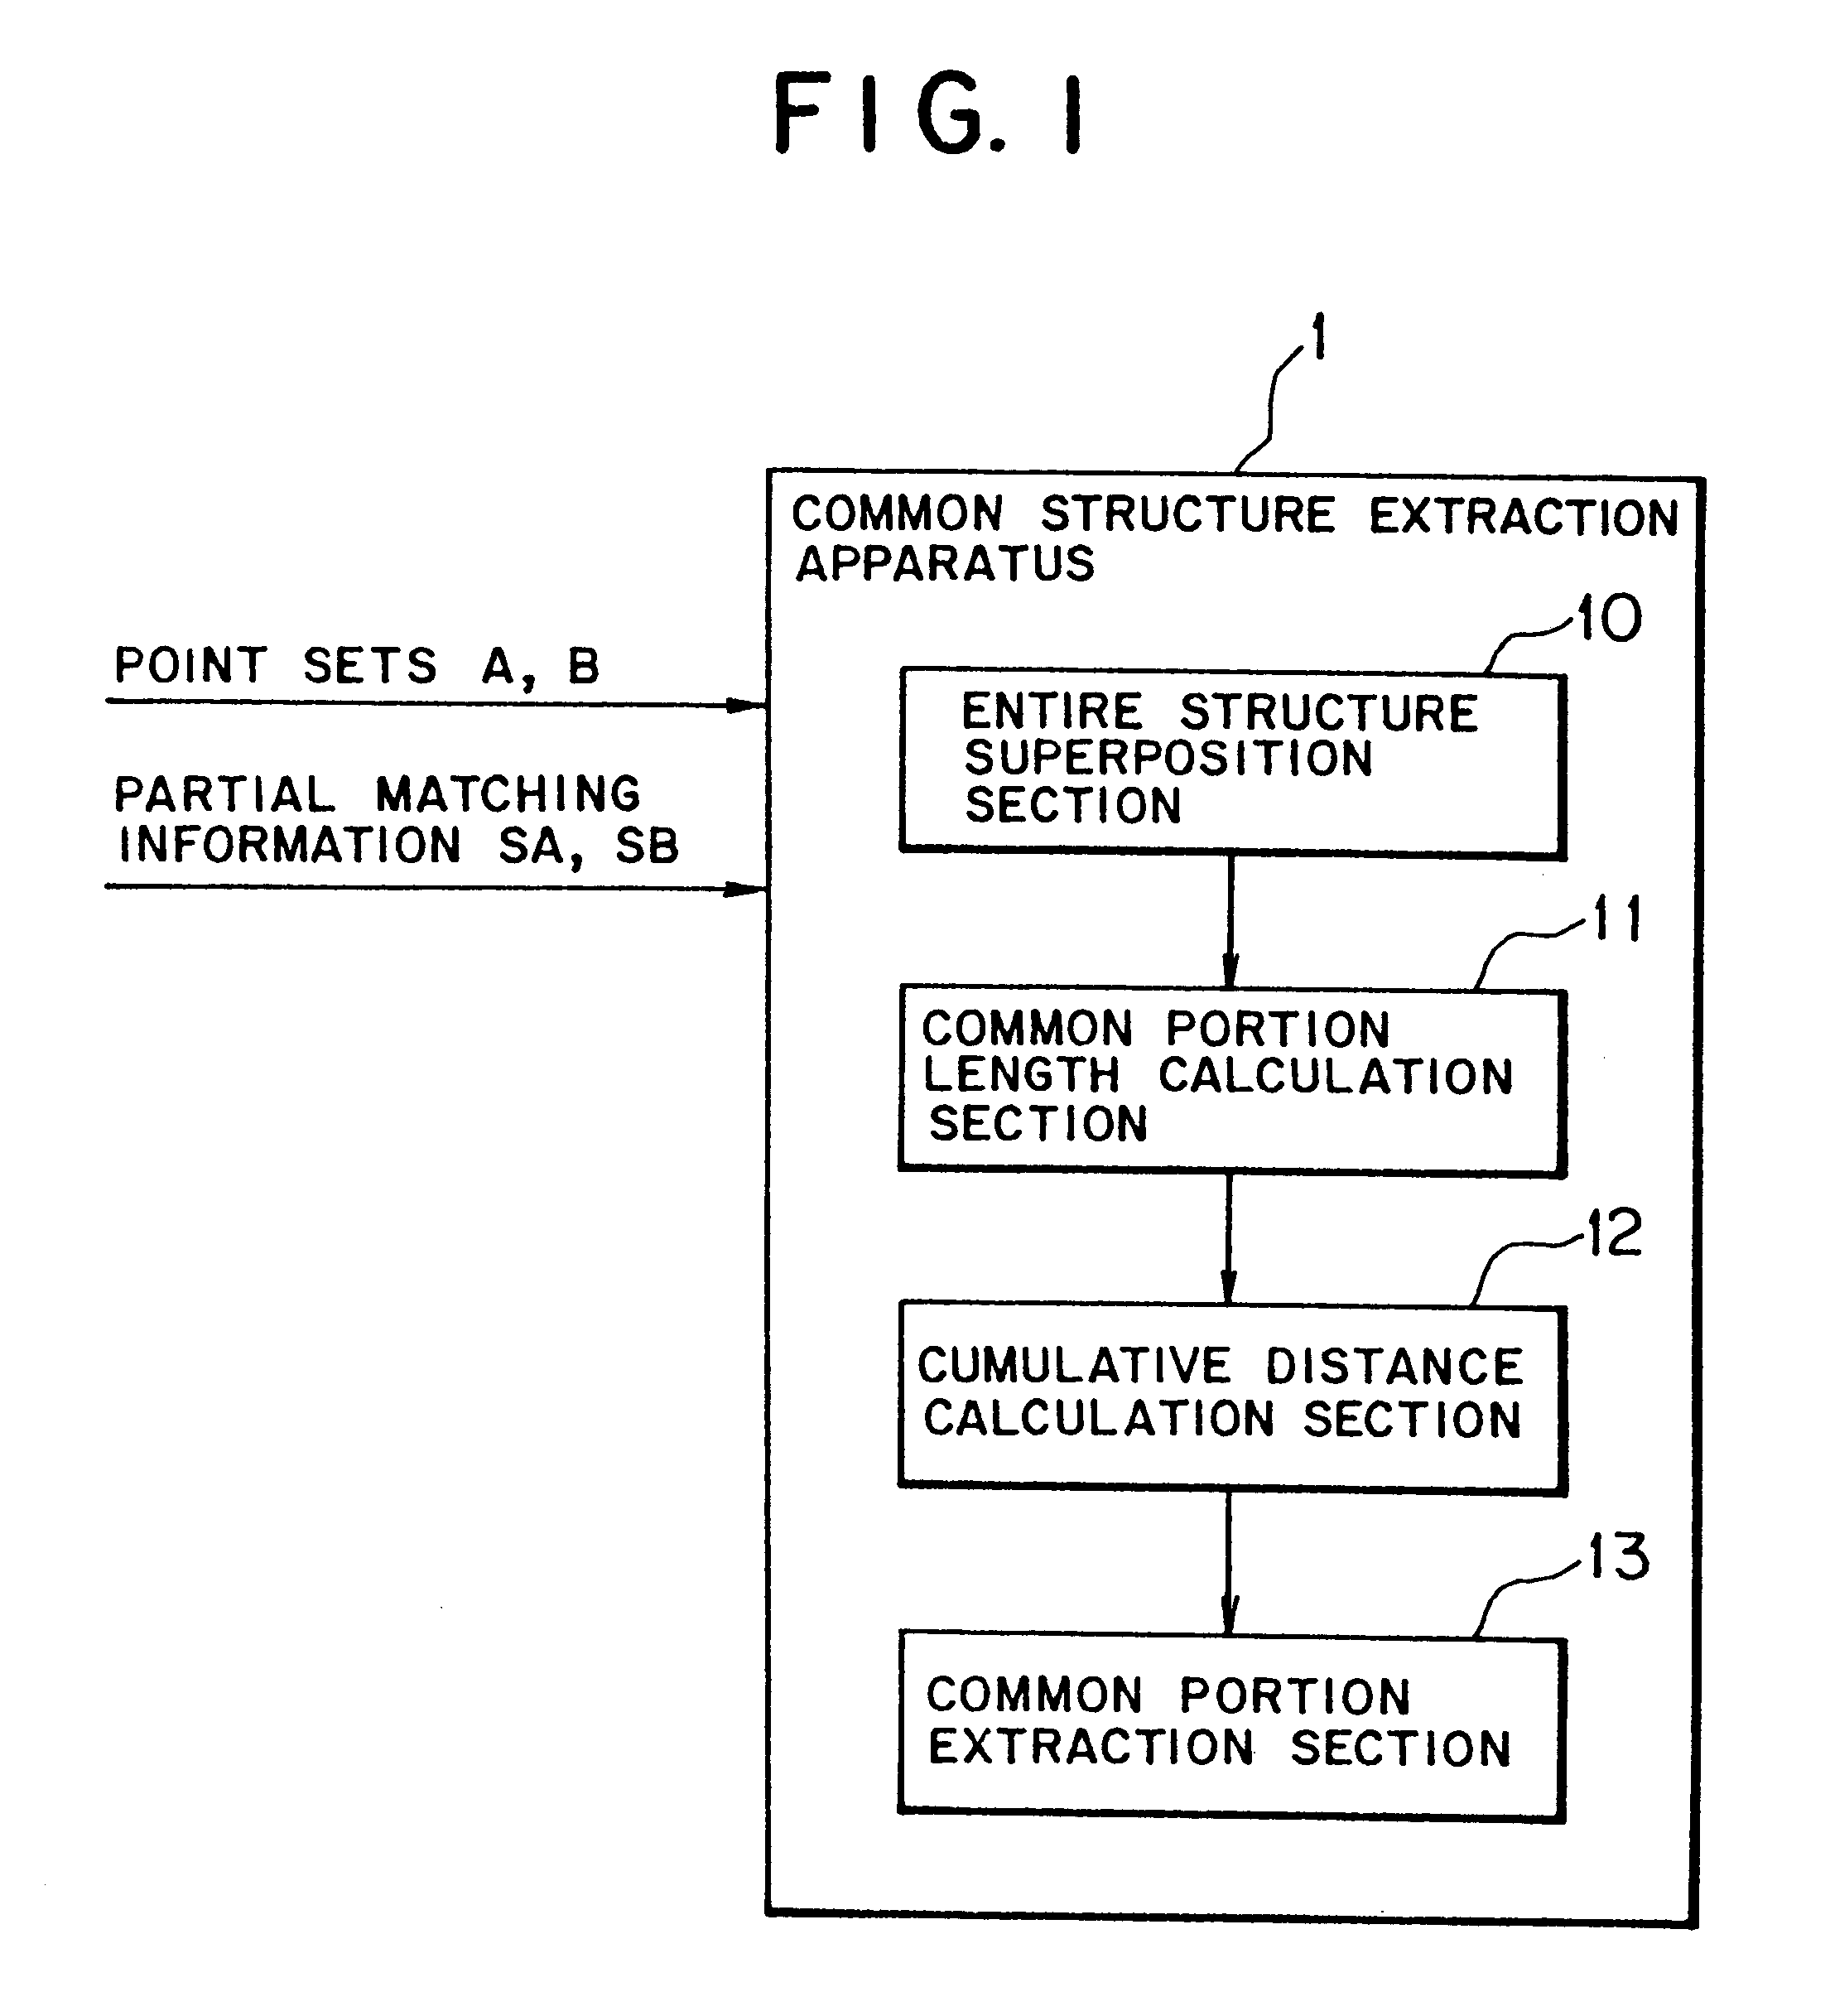 Common structure extraction apparatus